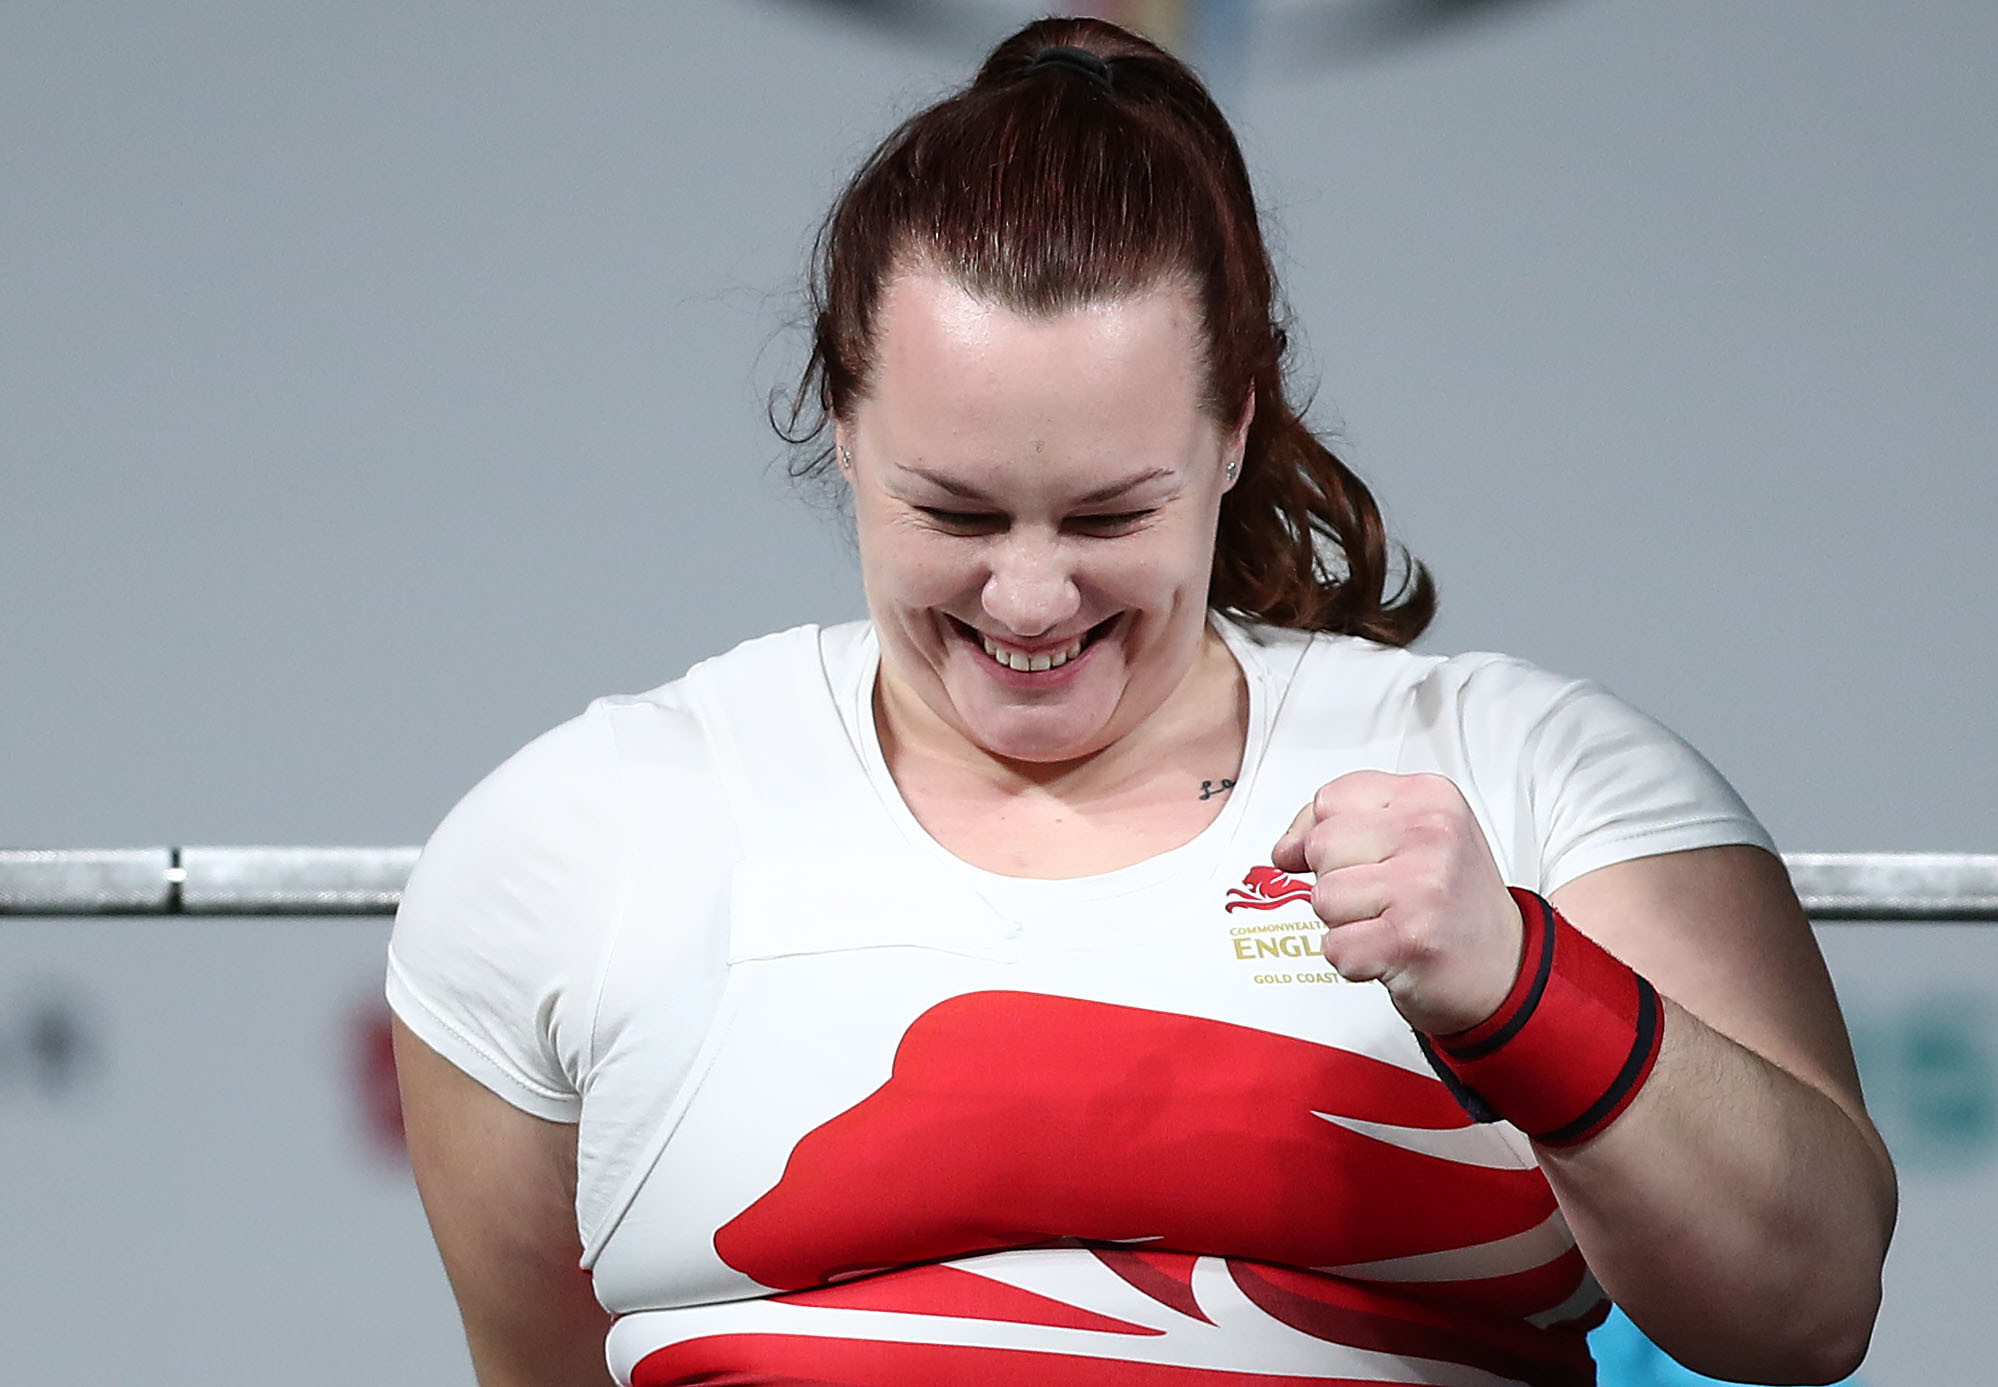 Great Britain's Louise Sugden is set to compete at the Tbilisi leg of the World Para Powerlifting World Cup ©Getty Images